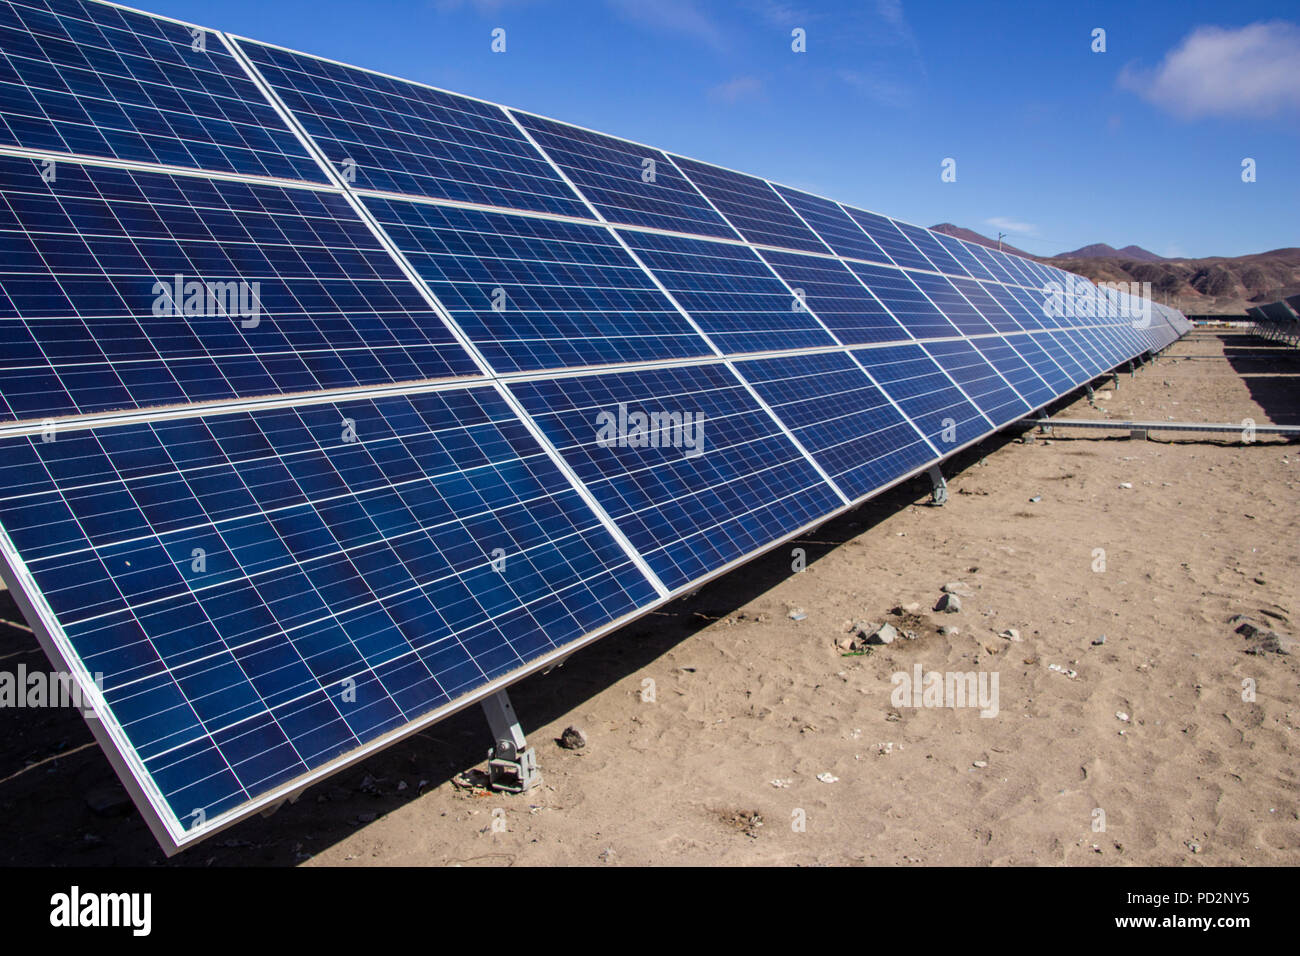 Solar Energy, a clean technology to reduce CO2 emissions, the best place for Solar Energy is Atacama Desert at Chile. Solar modules and cells. Stock Photo